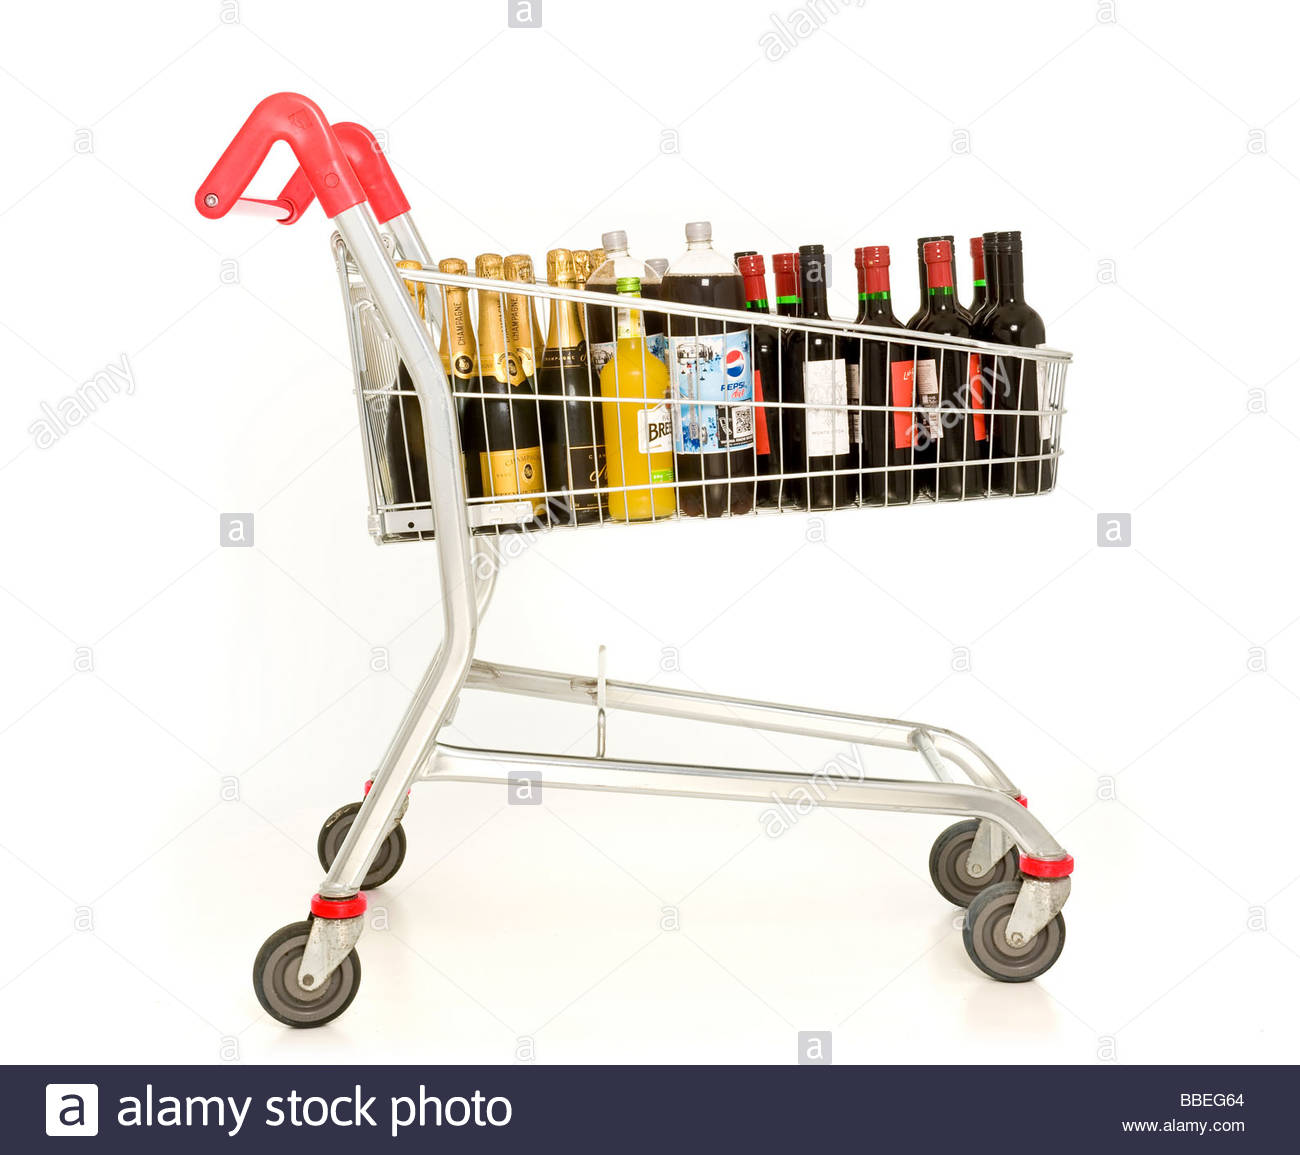 Supermarket Shopping Trolley Filled With Wine Champagne And Other